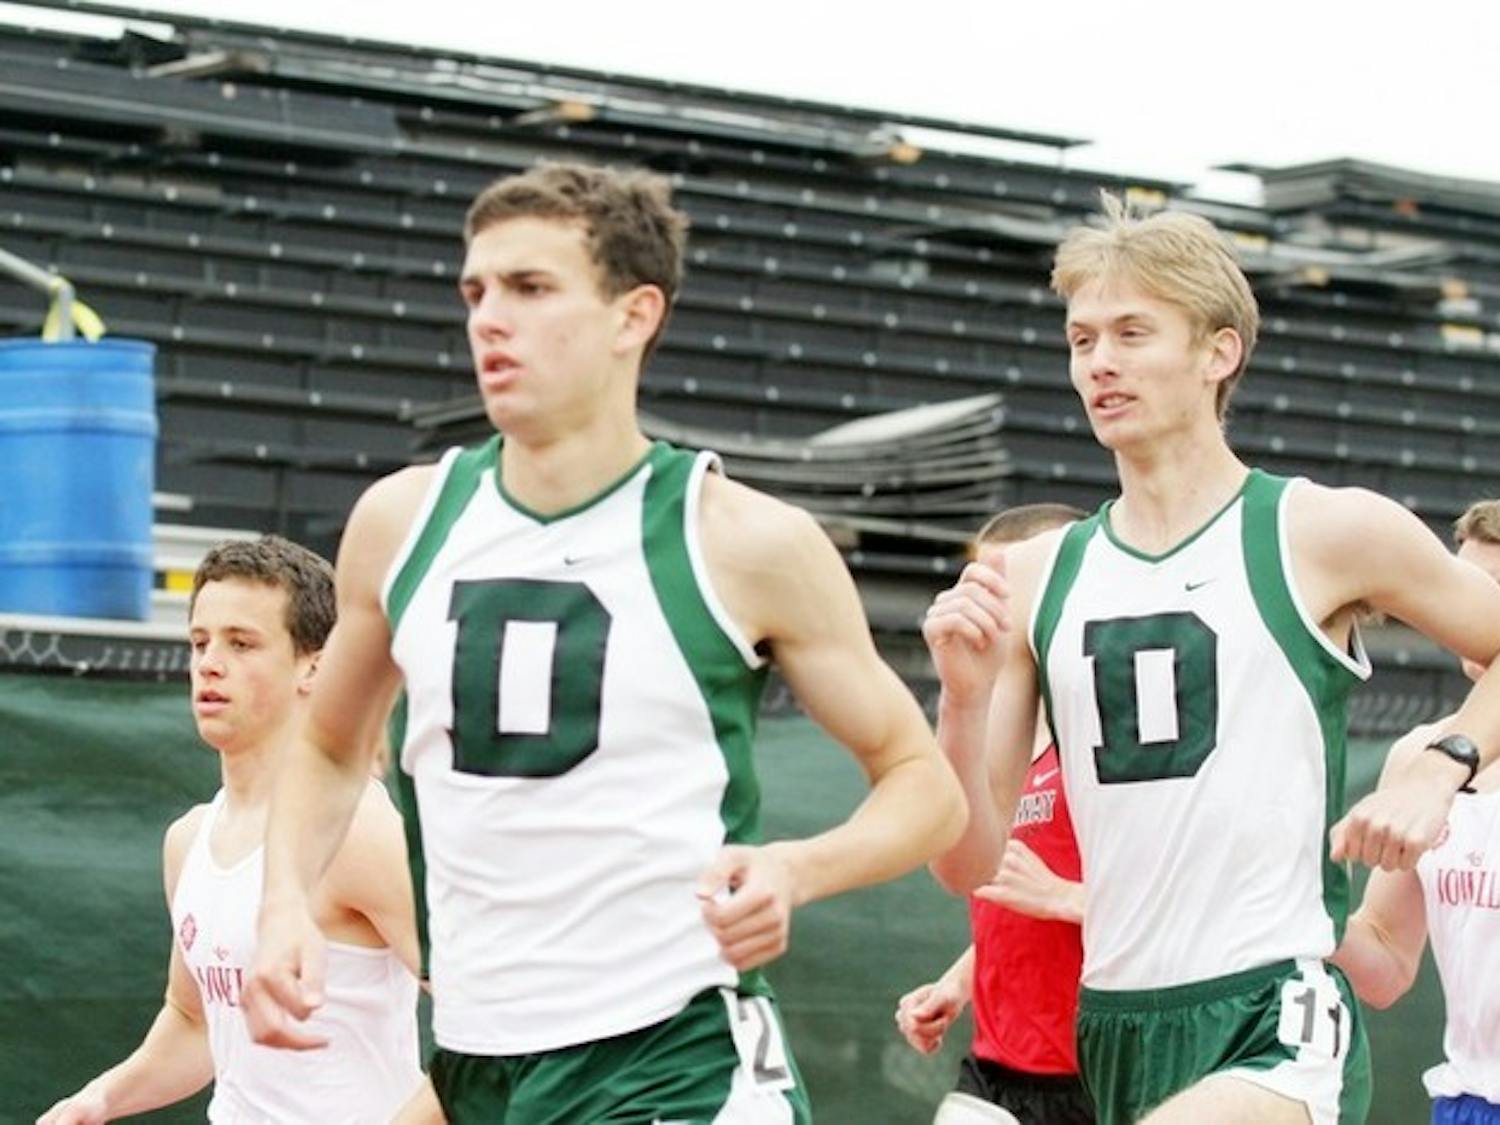 Mike Carmody '08 (left) finished second in the 800 meters at the New England Championship over the weekend.dsfasdfsdfs